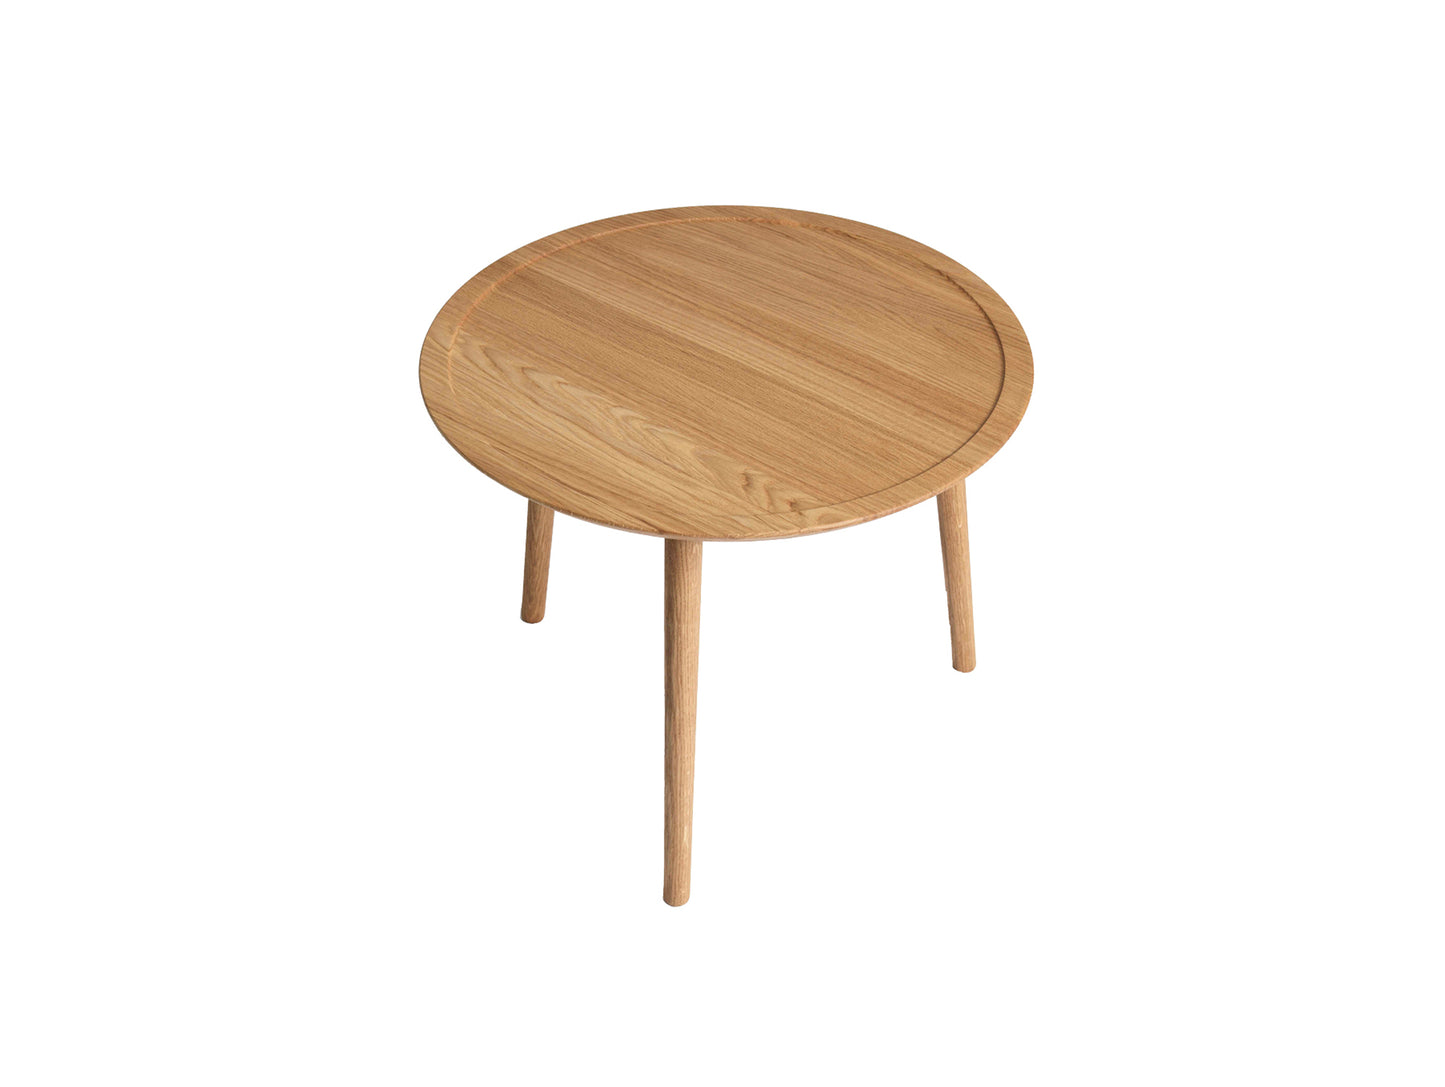 Dodona Coffee Table by Ro Collection - Diameter: 60 cm / Height: 46 cm / Oiled Oak